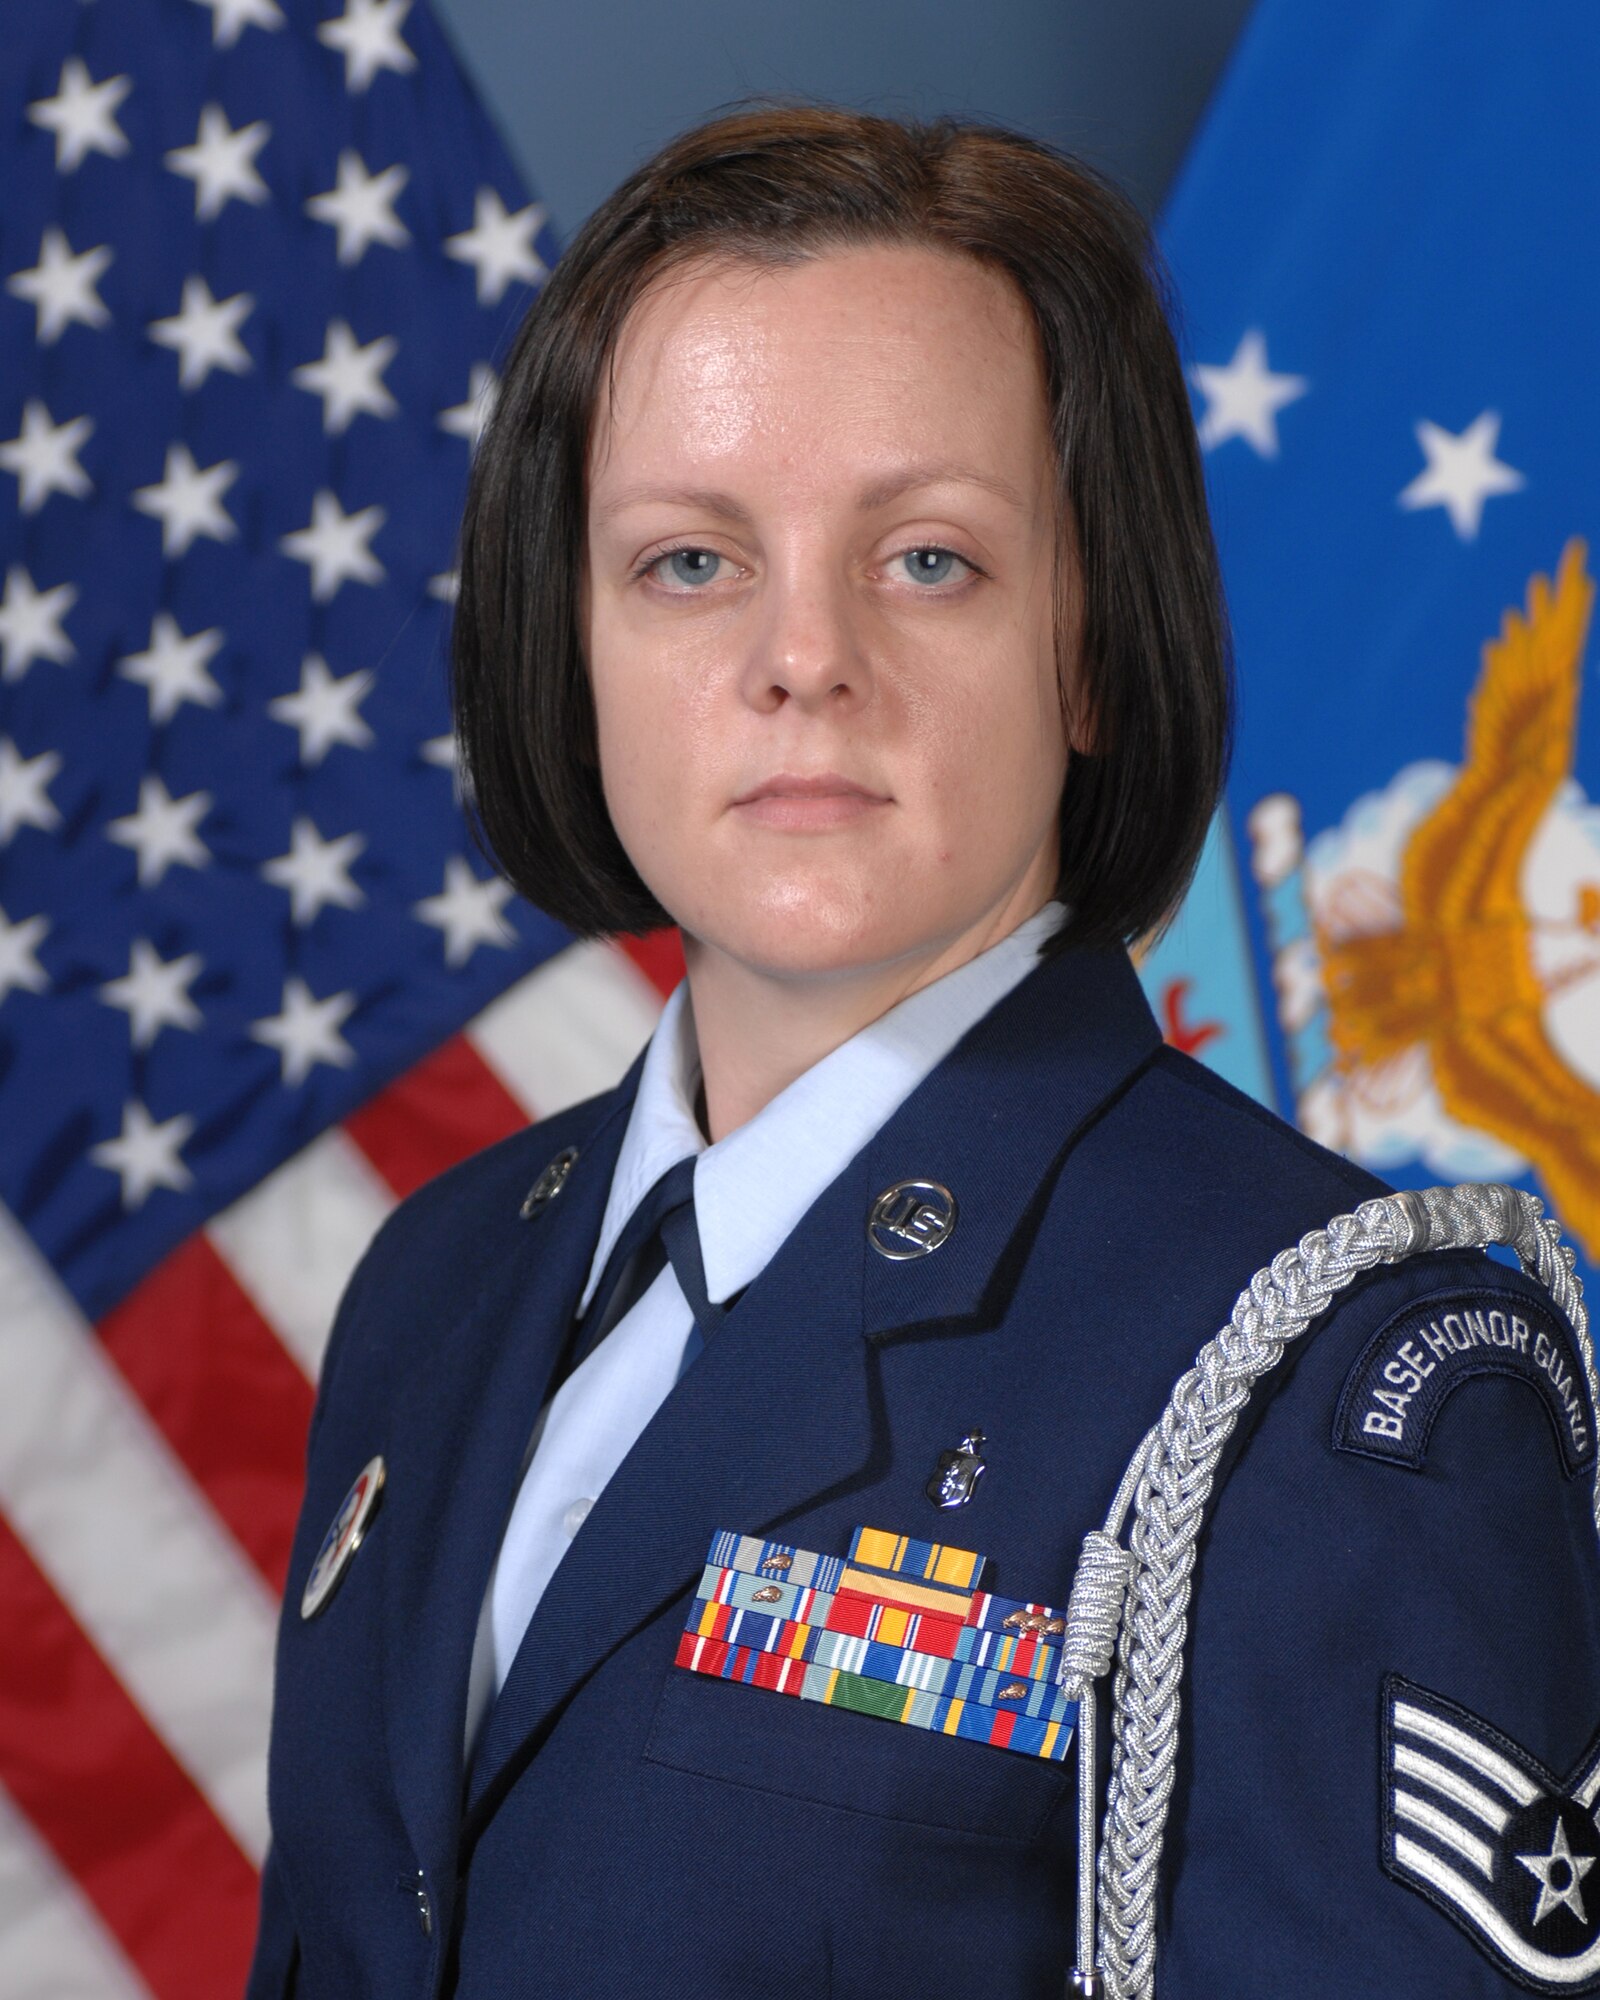 OFFUTT AIR FORCE BASE, Neb. -- Staff Sgt. Erica D. Larsen, assigned Shaw AFB, S.C., is one of 29 Airmen who will attend the 2010 Air Combat Command Outstanding Airmen of the Year Awards Banquet in Omaha, Neb., April 21. Sergeant Larsen is nominated for the Outstanding Honor Guard Program Manager of the Year Award. U.S. Air Force courtesy photo